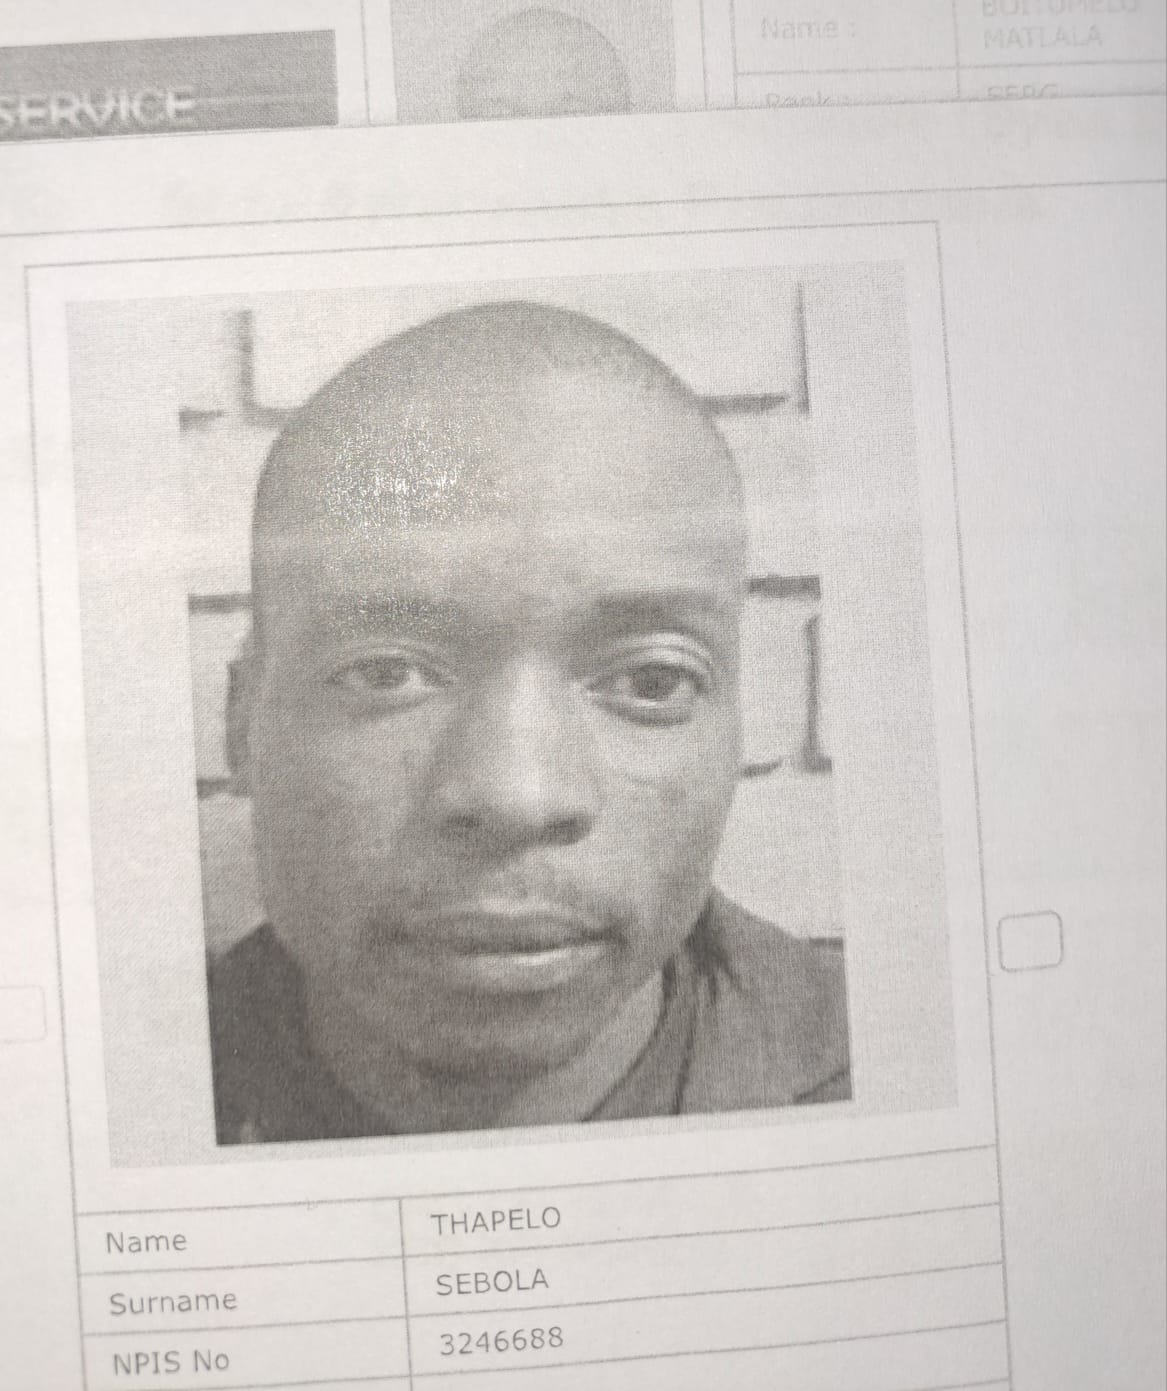 MOTETEMA SAPS LAUNCH MANHUNT FOR A MALE SUSPECT ESCAPING FROM LAWFUL CUSTODY